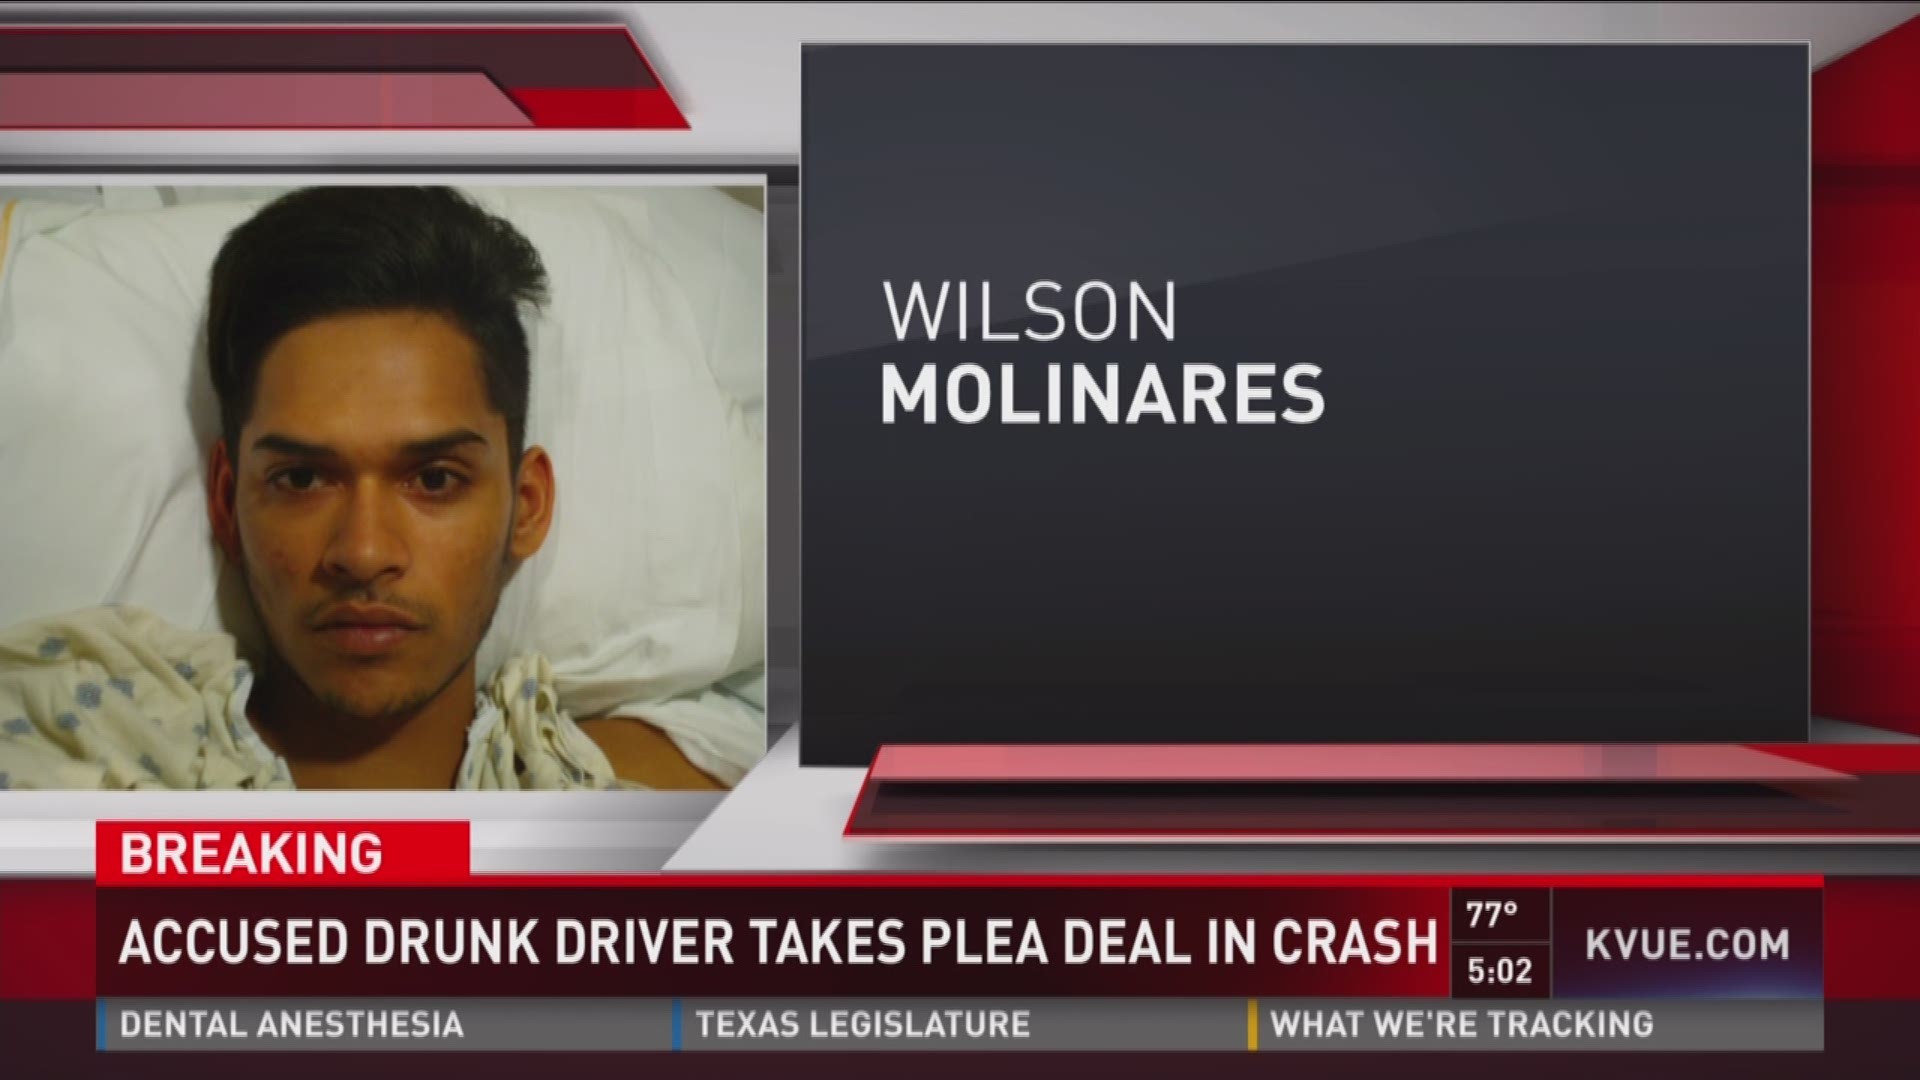 Wilson Molinares, then 22, took a plea deal in the February 2016 crash that killed 4 in Kyle.